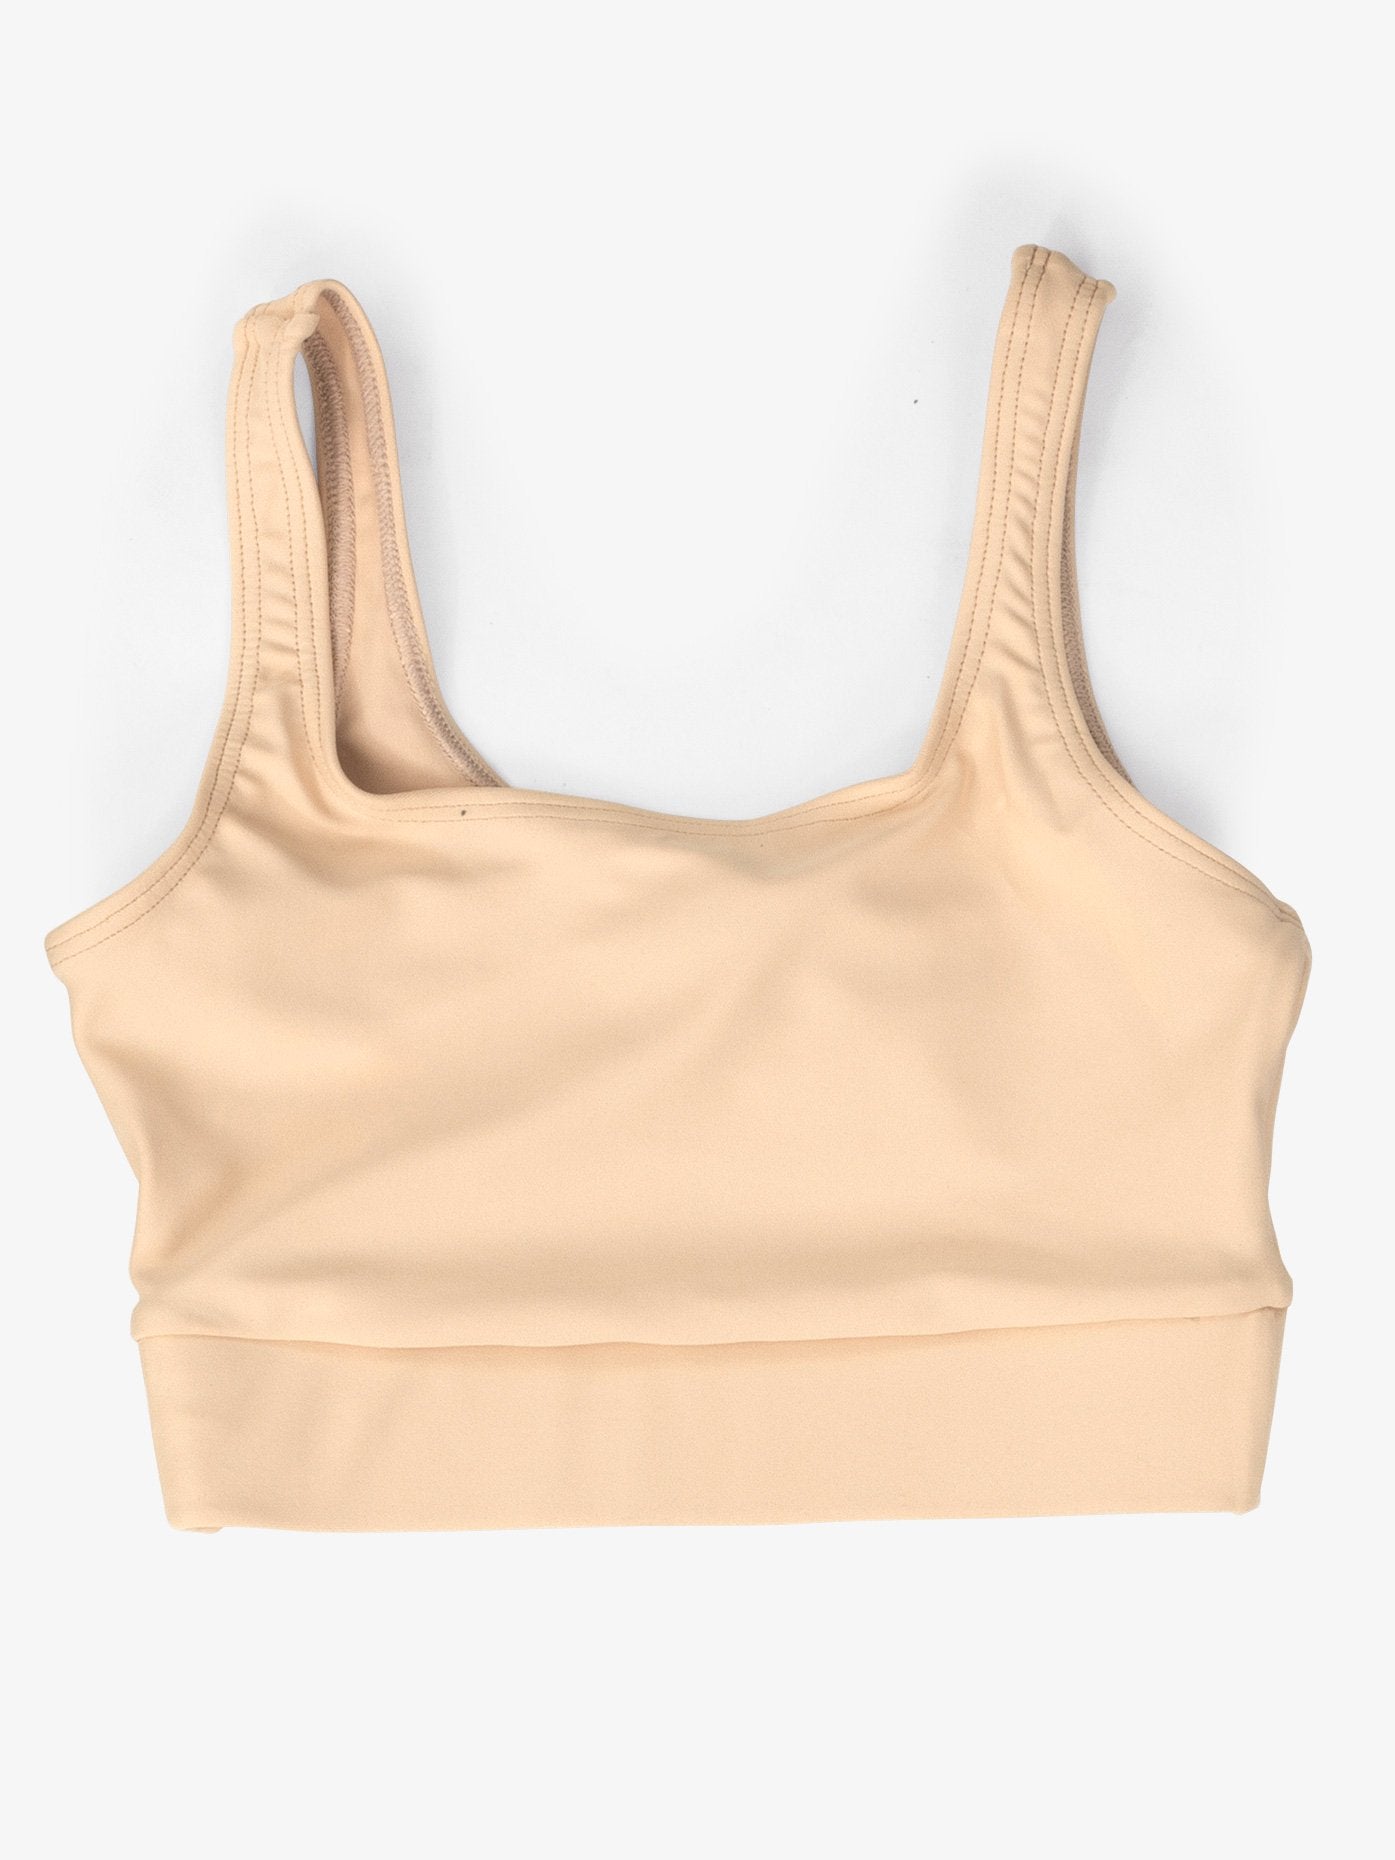 Girl's pinched back nude bra top